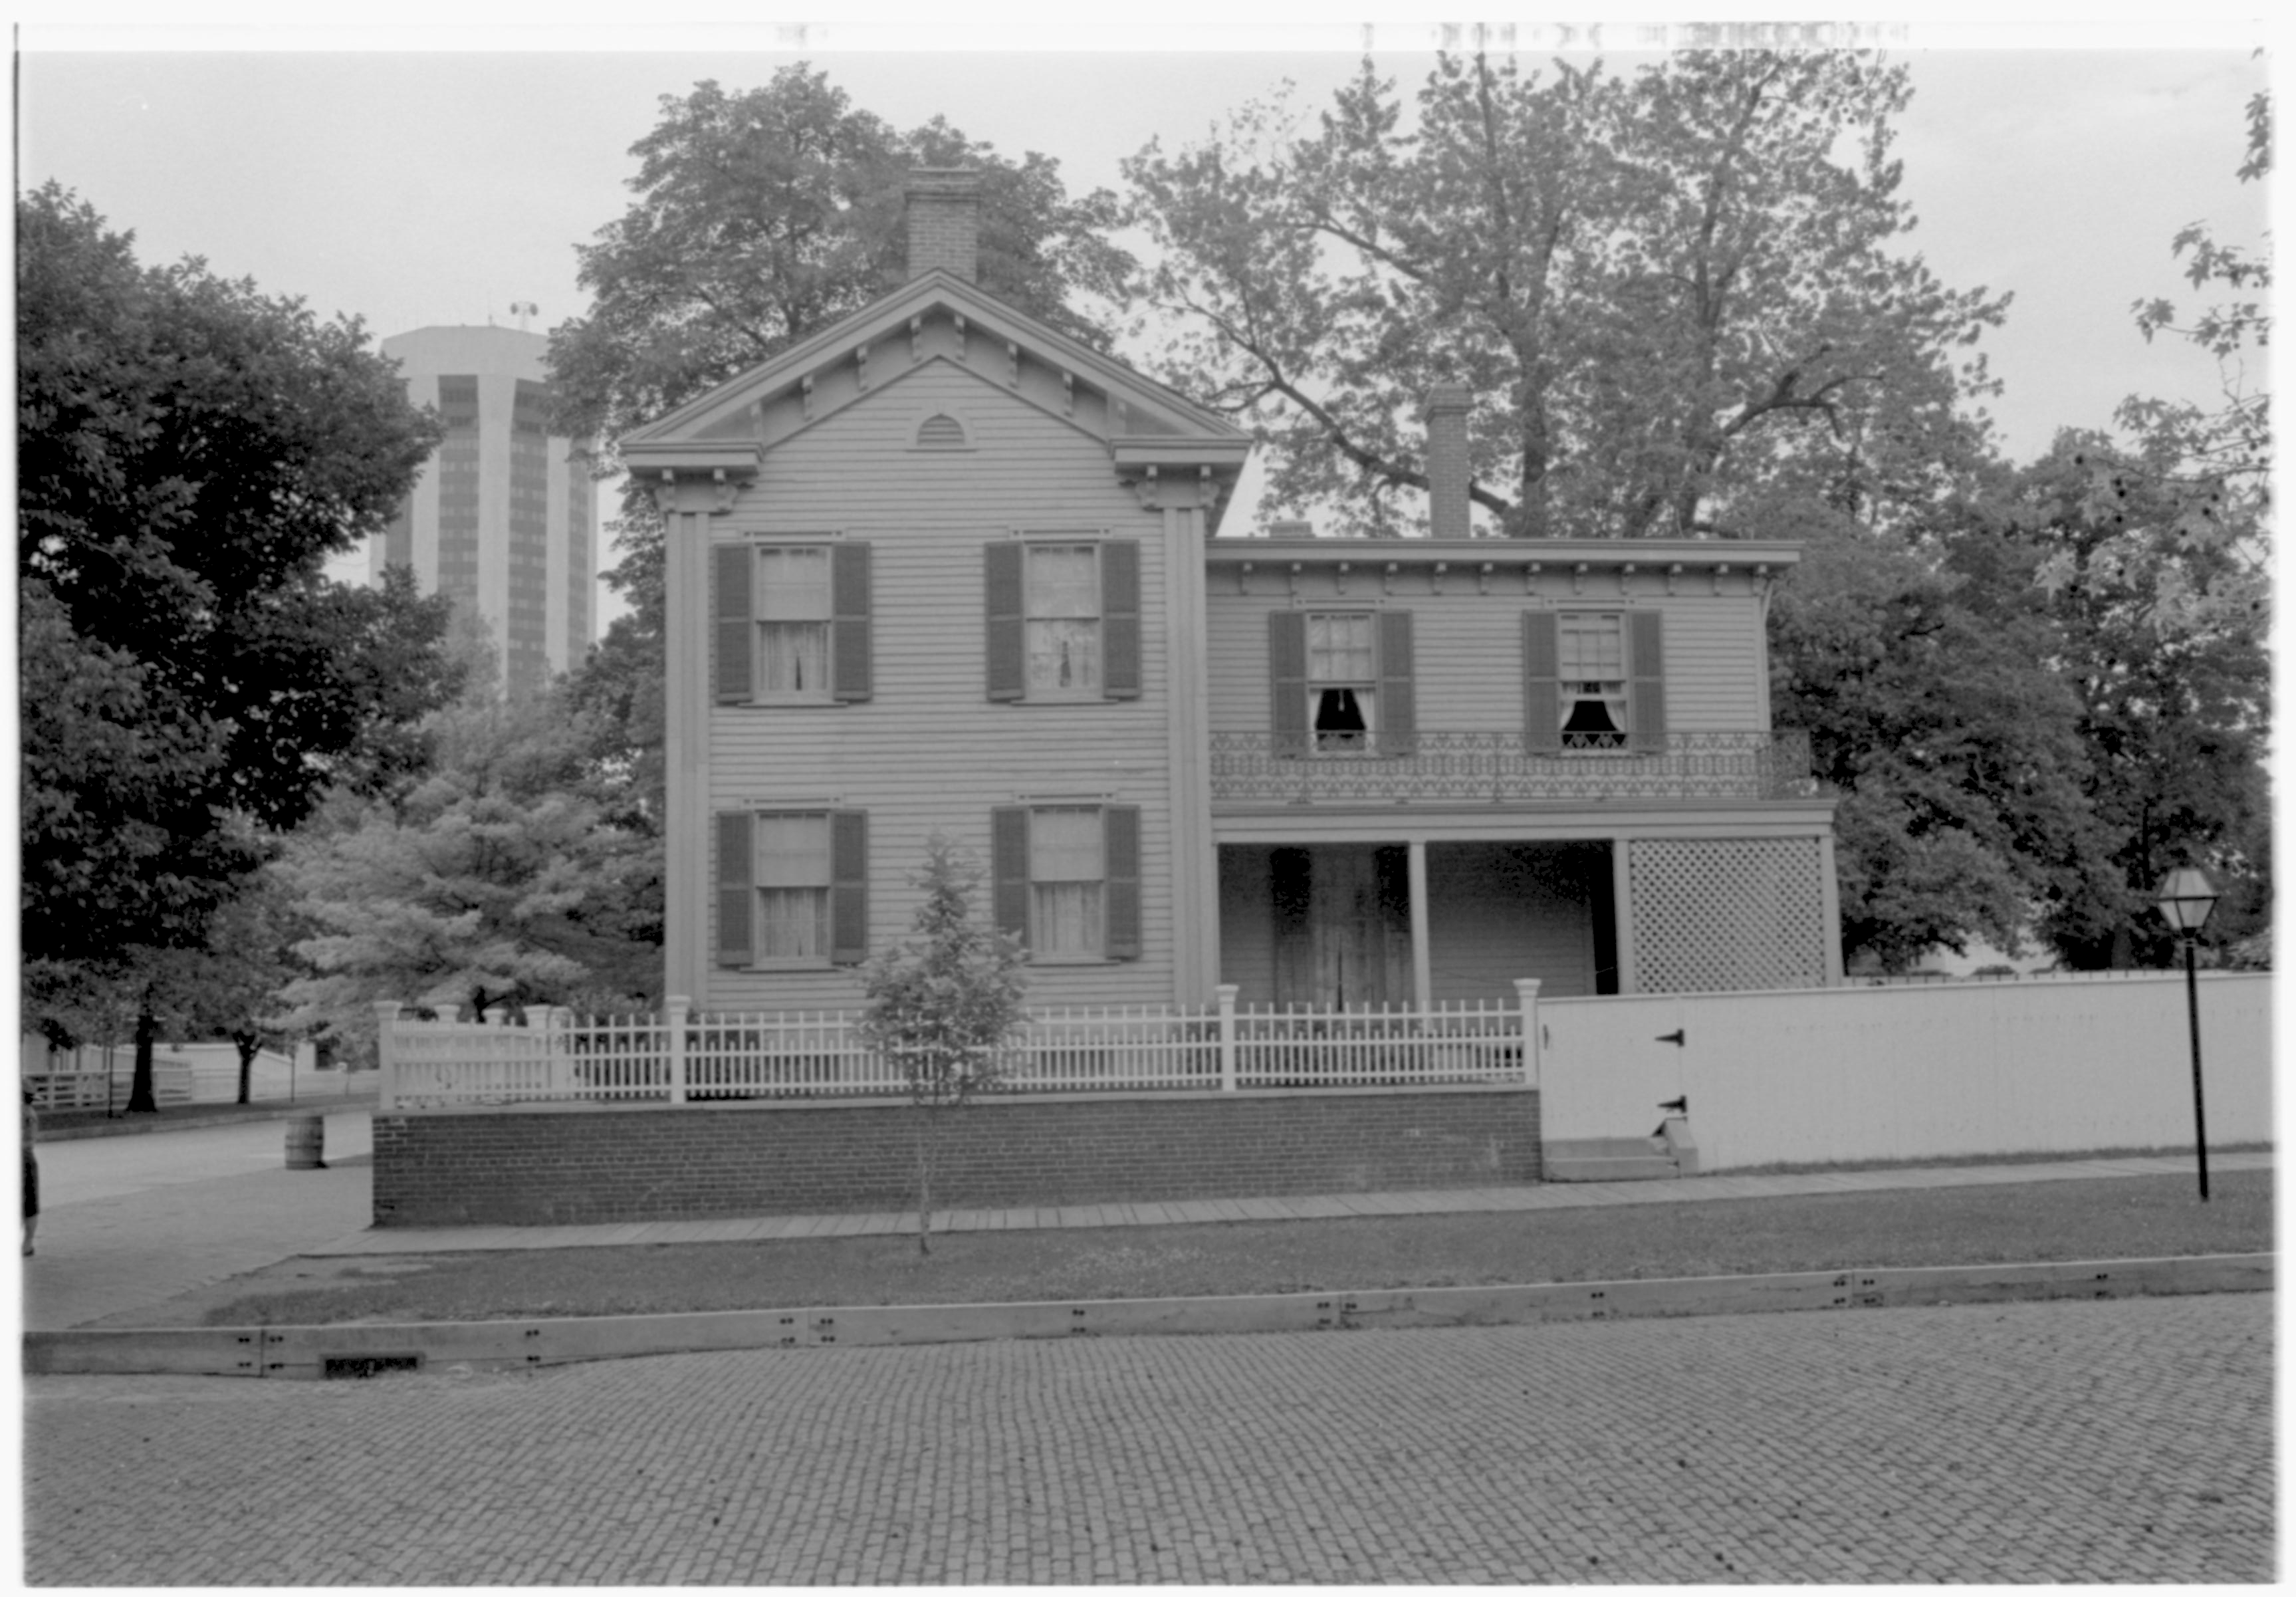 Lincoln Home South elevation. Jackson Street in foreground is bricked over. Several large trees surround the Home. Hilton Hotel Tower visible in far background left. Ranger Ruth Ketchum (?) barely visible on far left. Looking North from South of Jackson Street Lincoln Home, Jackson, staff, Hilton Hotel